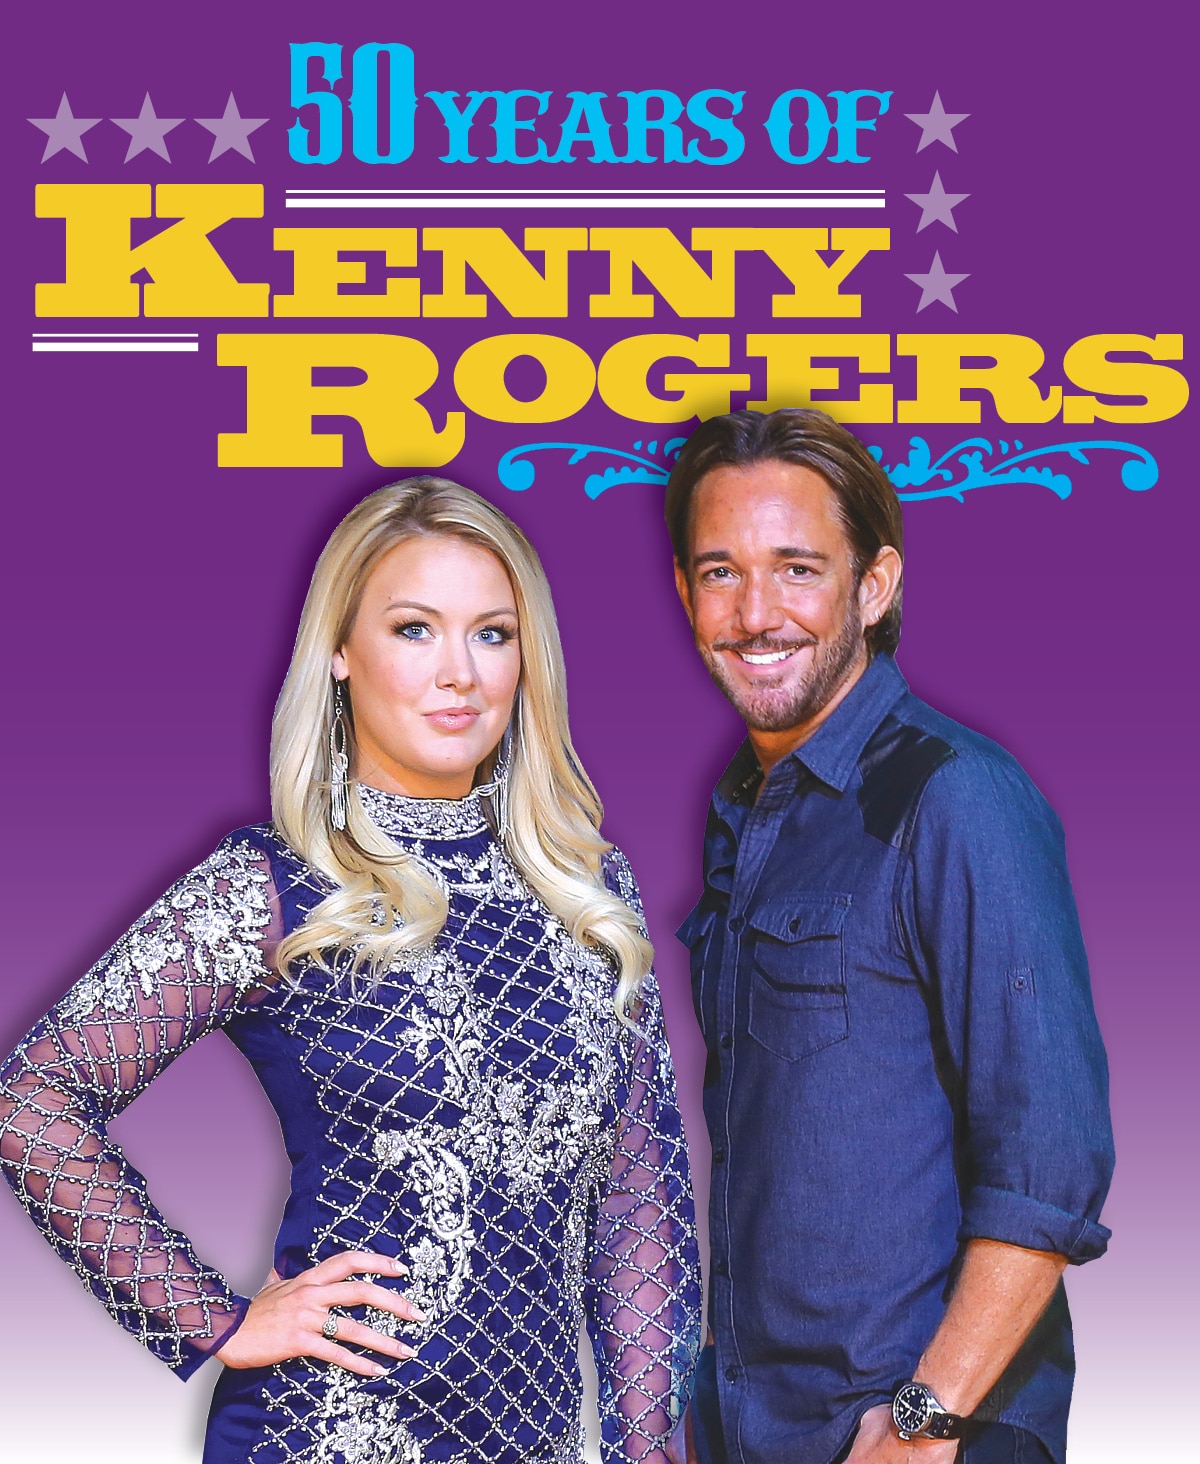 50 years of kenny rogers, kenny rogers tribute show in branson